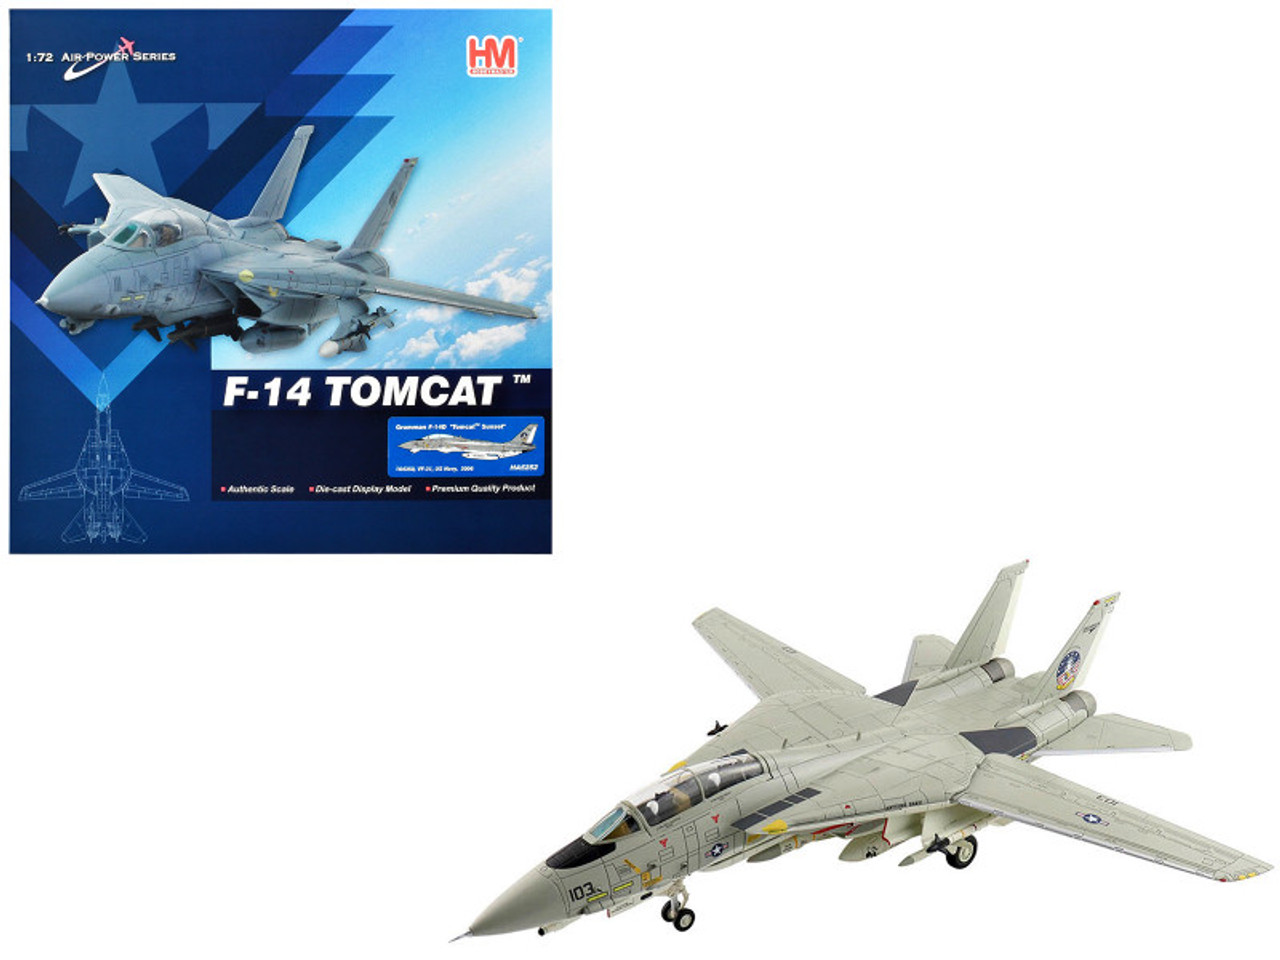 Grumman F-14D Tomcat Fighter Aircraft "Tomcat Sunset VF-31" (2006) United States Navy "Air Power Series" 1/72 Diecast Model by Hobby Master